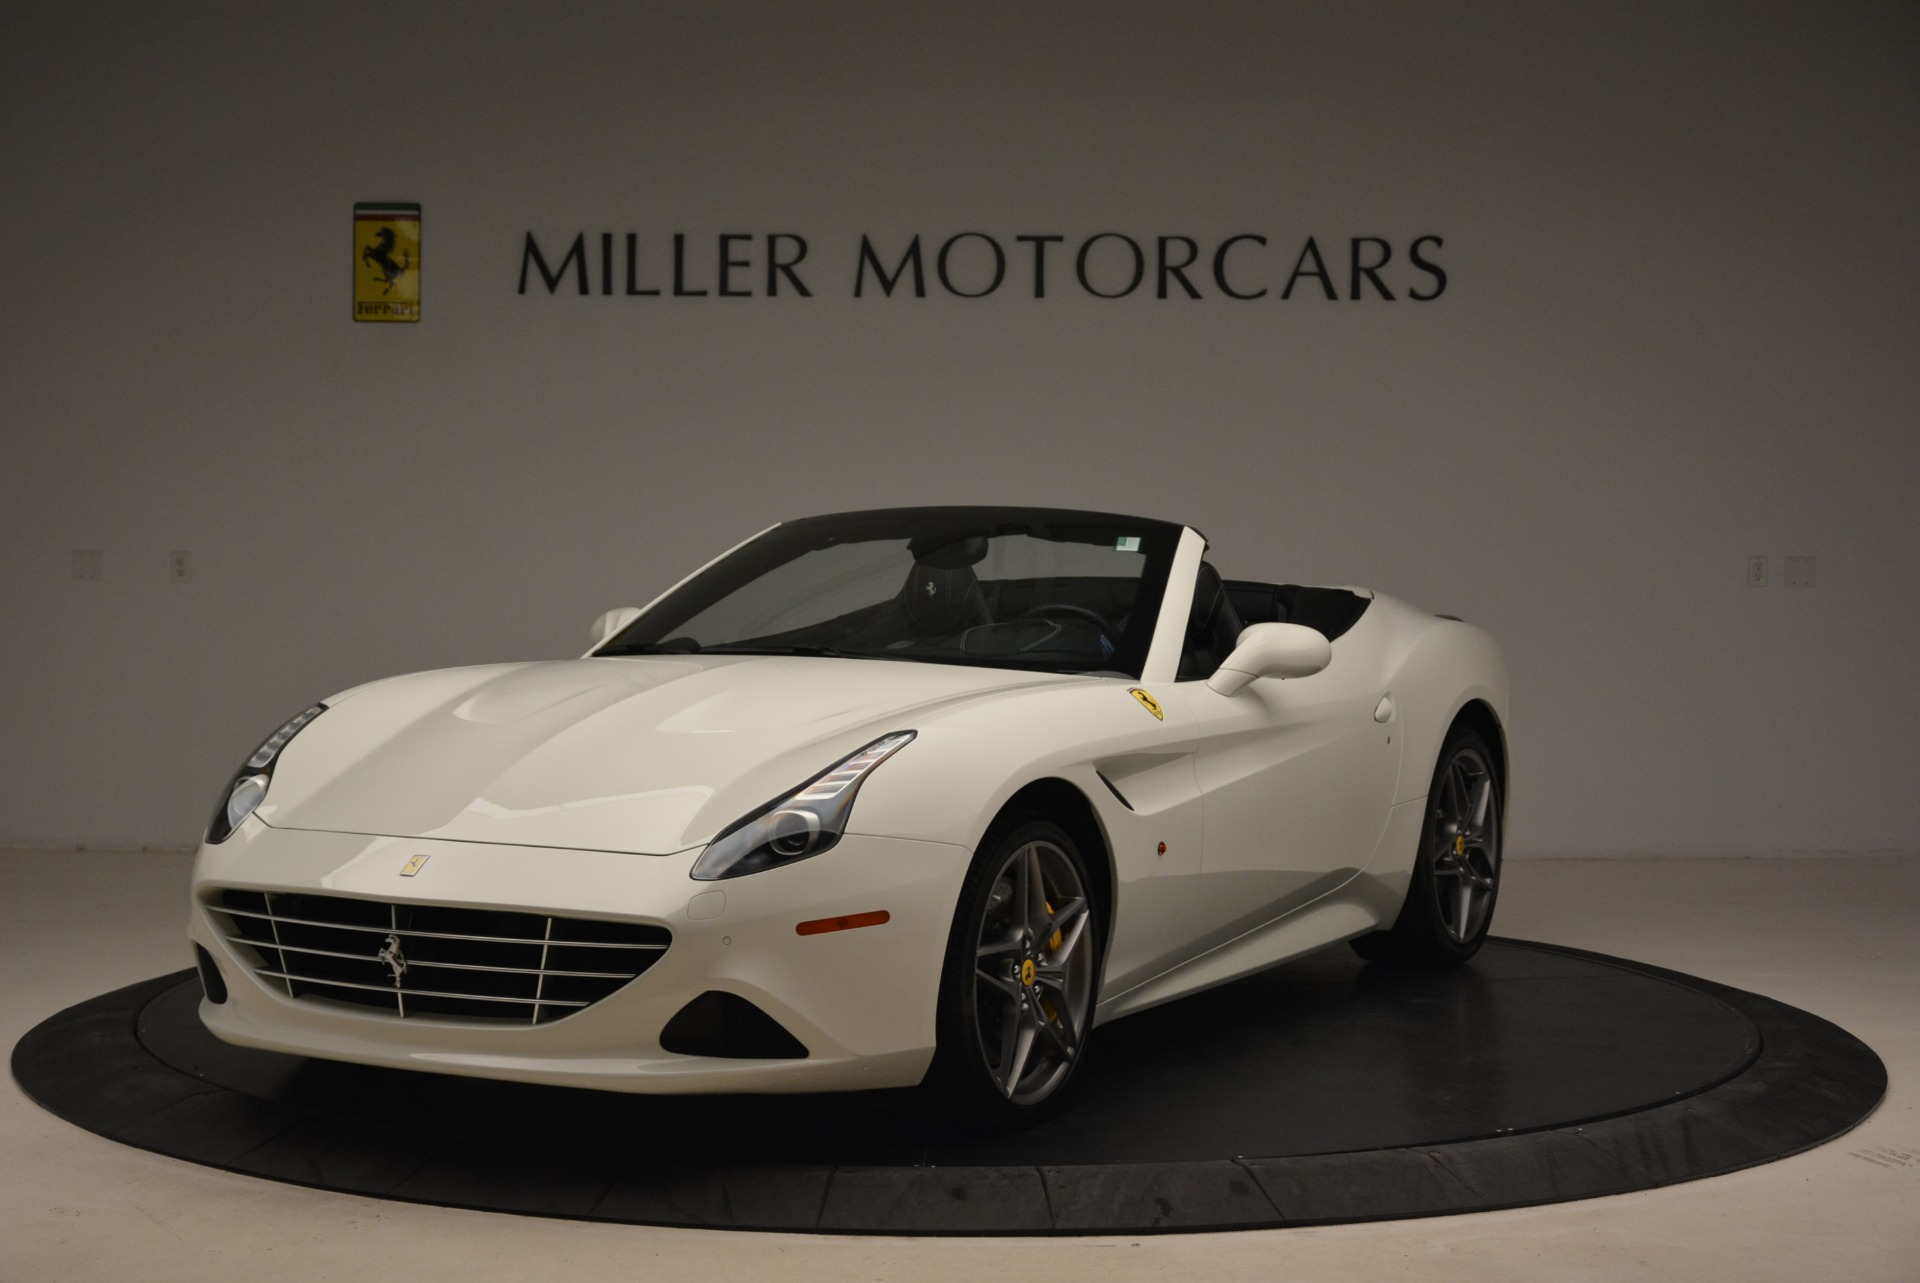 Used 2015 Ferrari California T for sale Sold at Rolls-Royce Motor Cars Greenwich in Greenwich CT 06830 1